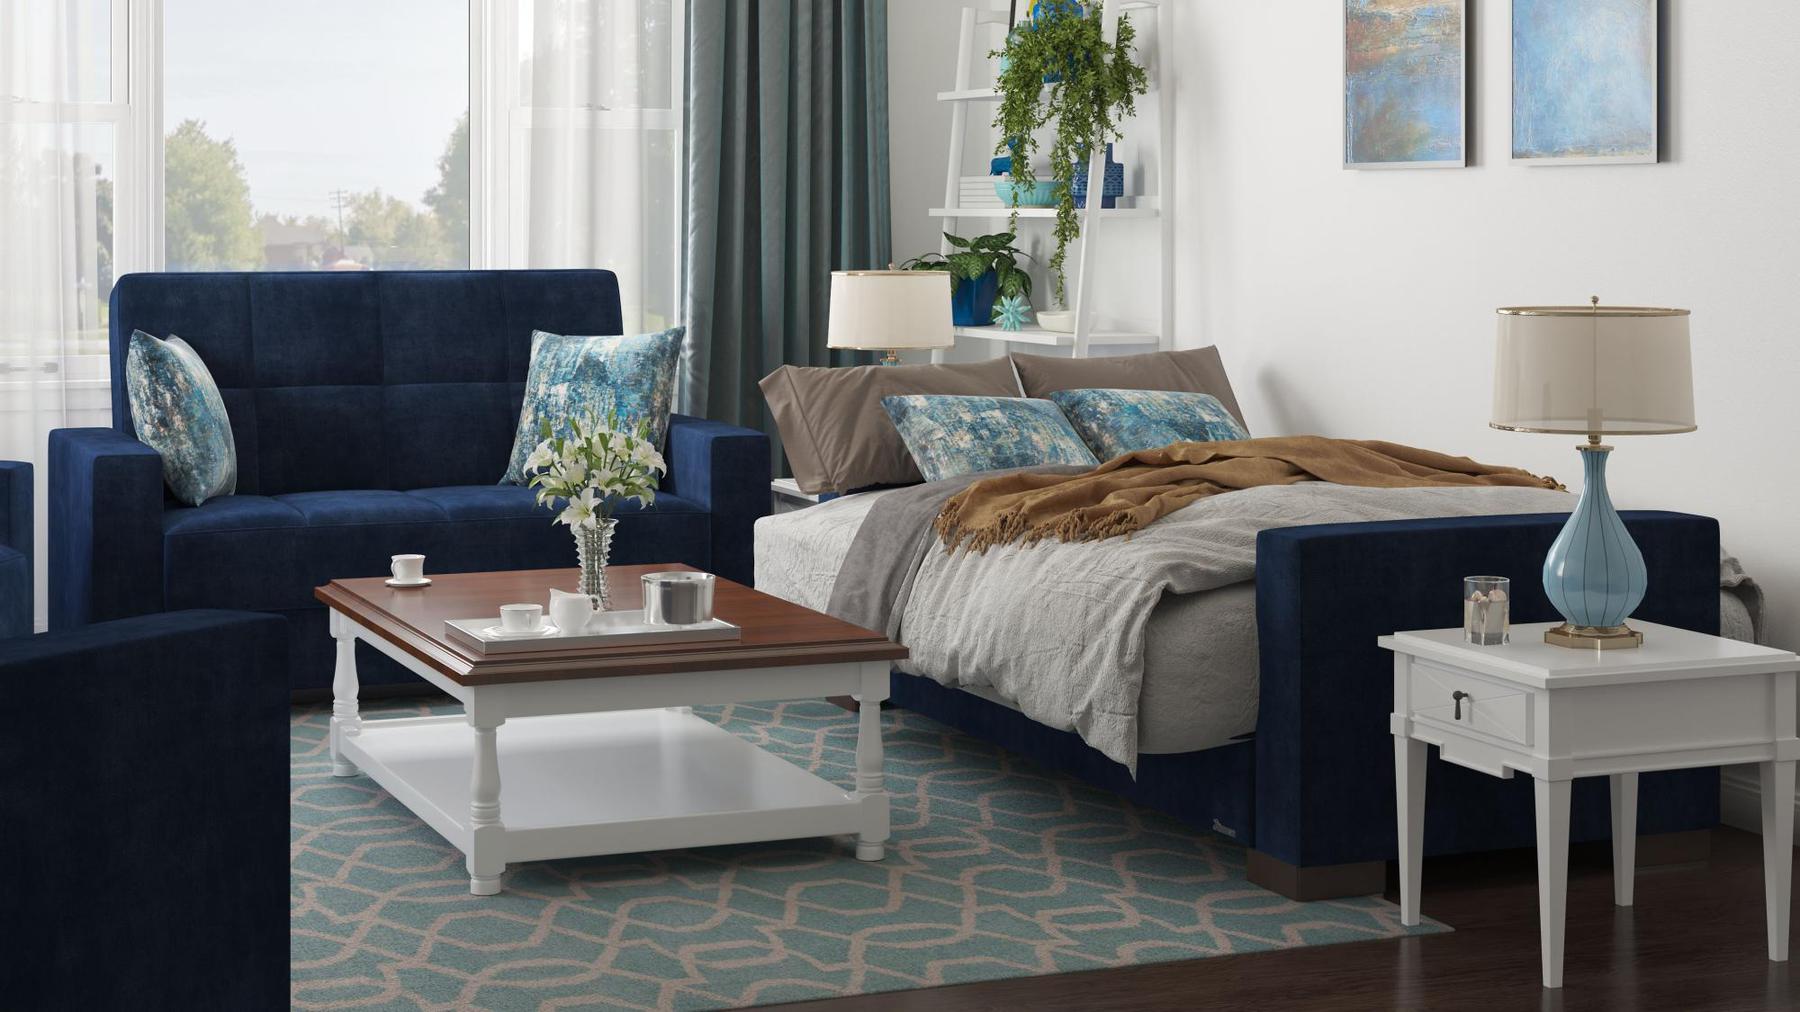 Modern design, True Blue , Microfiber  upholstered convertible sleeper Loveseat with underseat storage from Voyage Track by Ottomanson in living room lifestyle setting converted to sleeper. This Loveseat measures 67 inches width by 36 inches depth by 41 inches height.